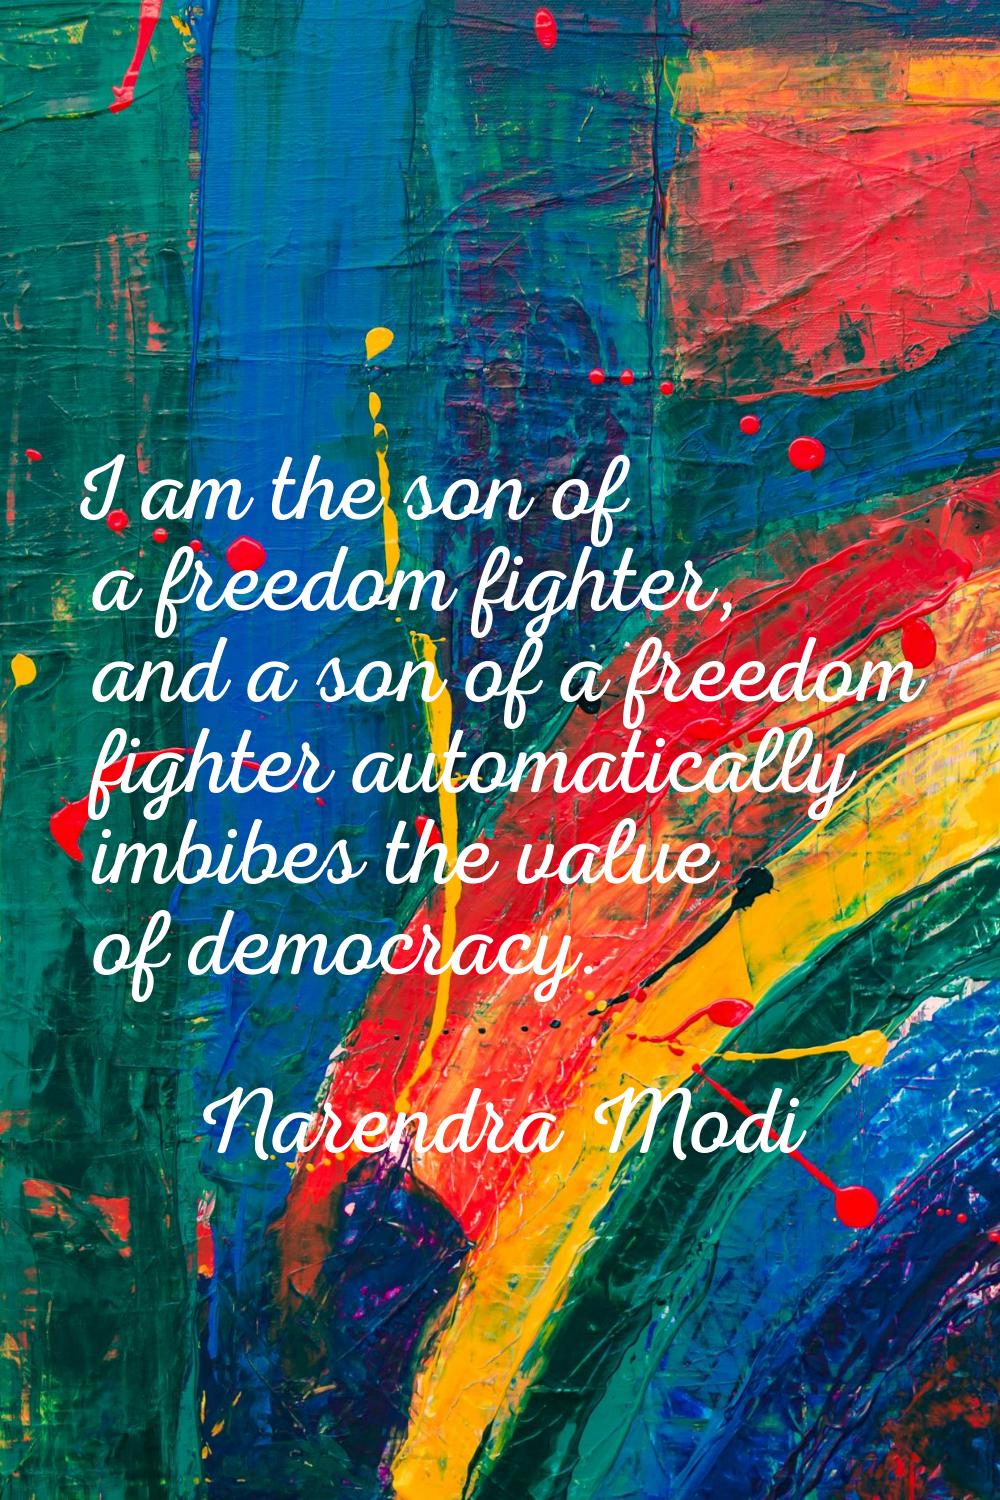 I am the son of a freedom fighter, and a son of a freedom fighter automatically imbibes the value o